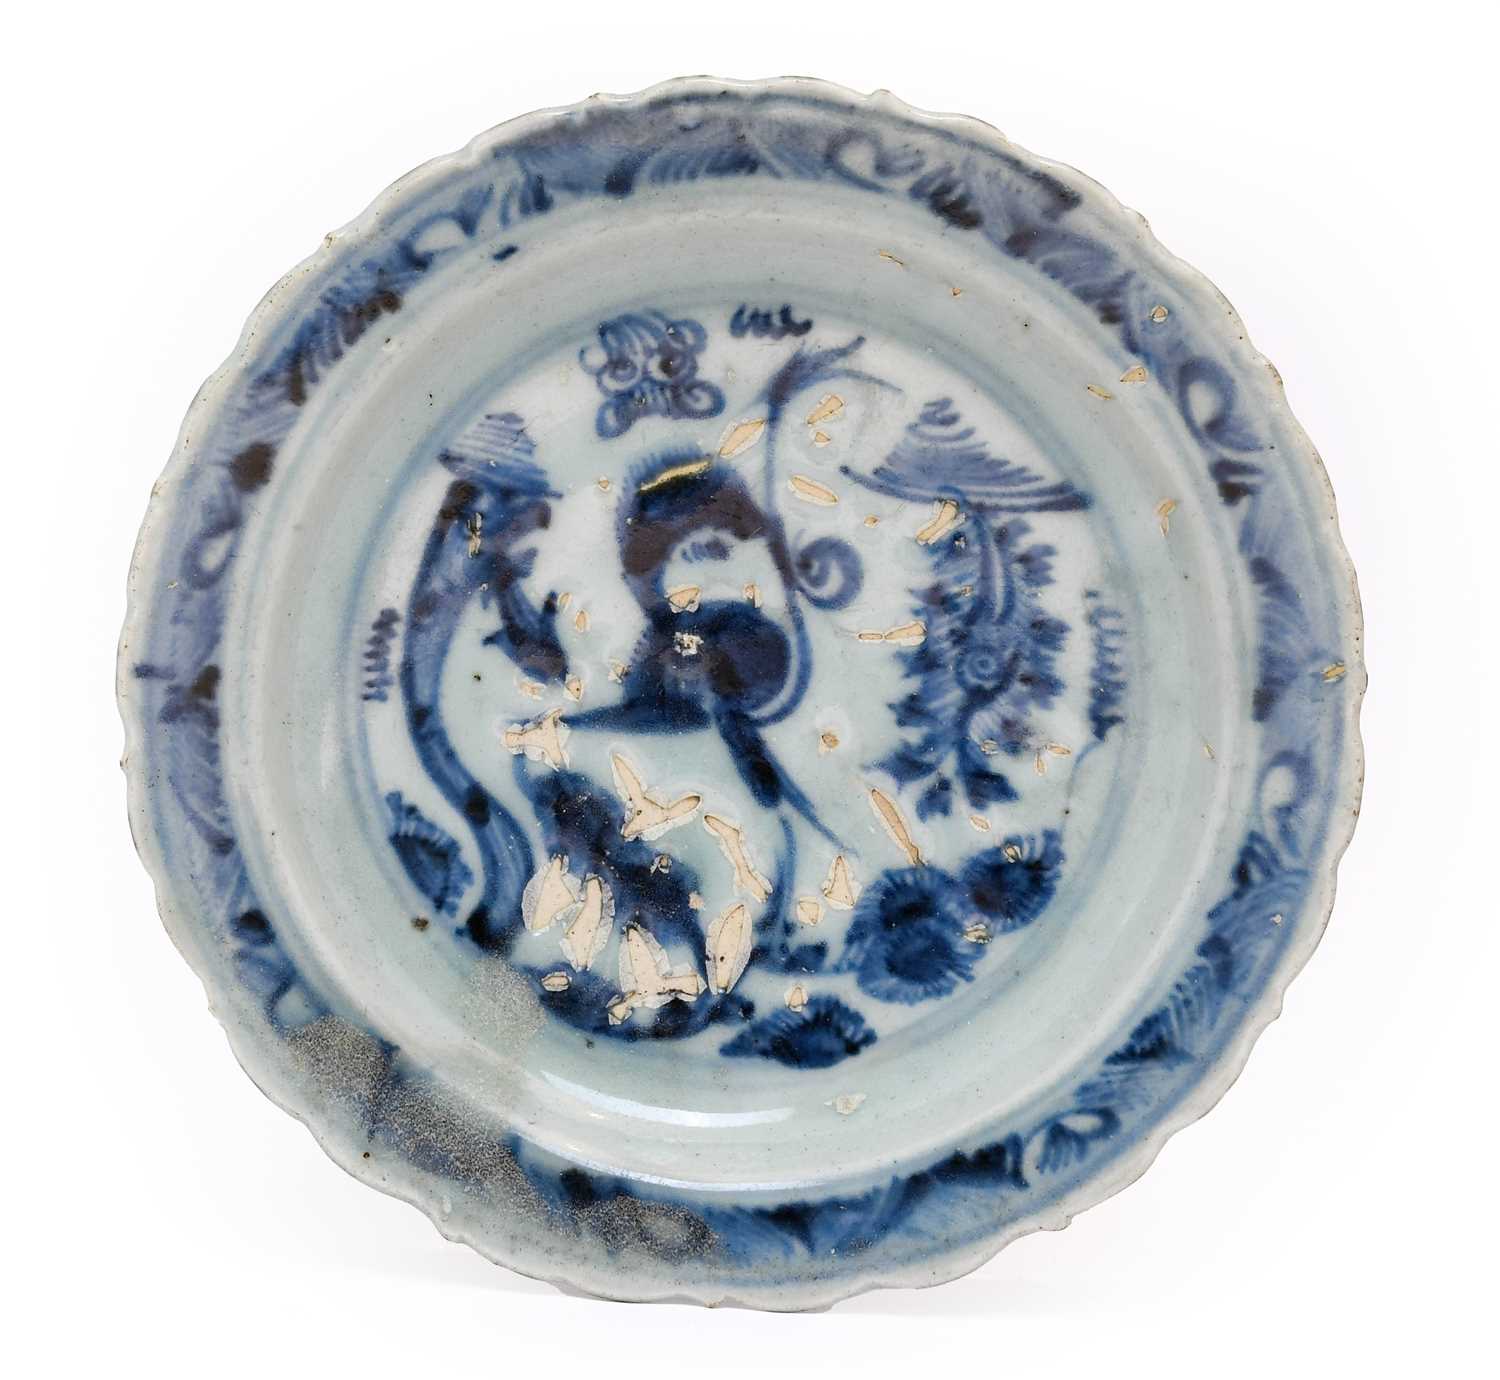 A Chinese Kraak Porcelain Dish, early 17th century, typically painted in underglaze blue with - Image 4 of 5